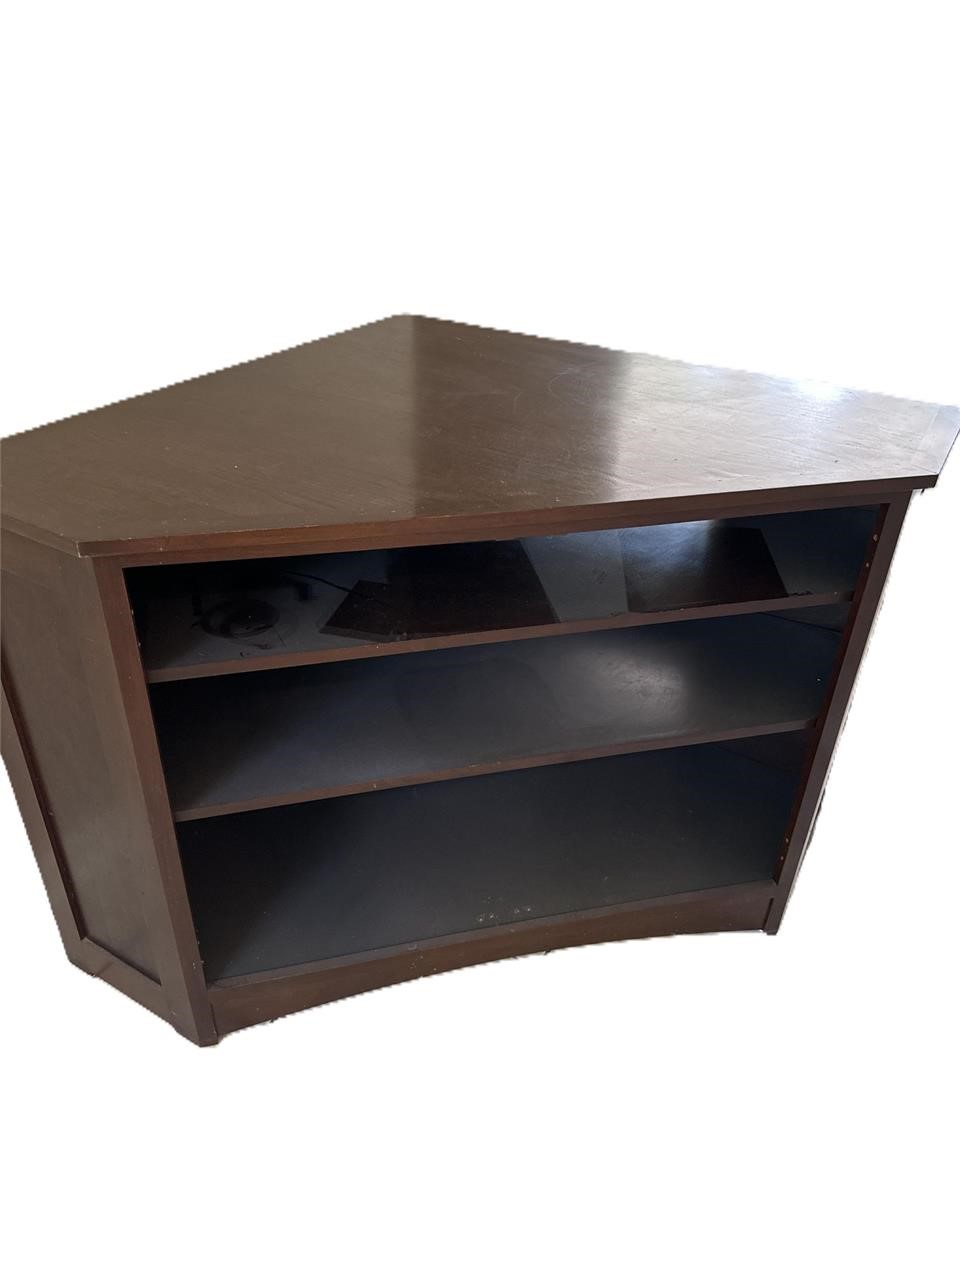 Corner TV Stand - Wood and Brown - 3 Open Shelves